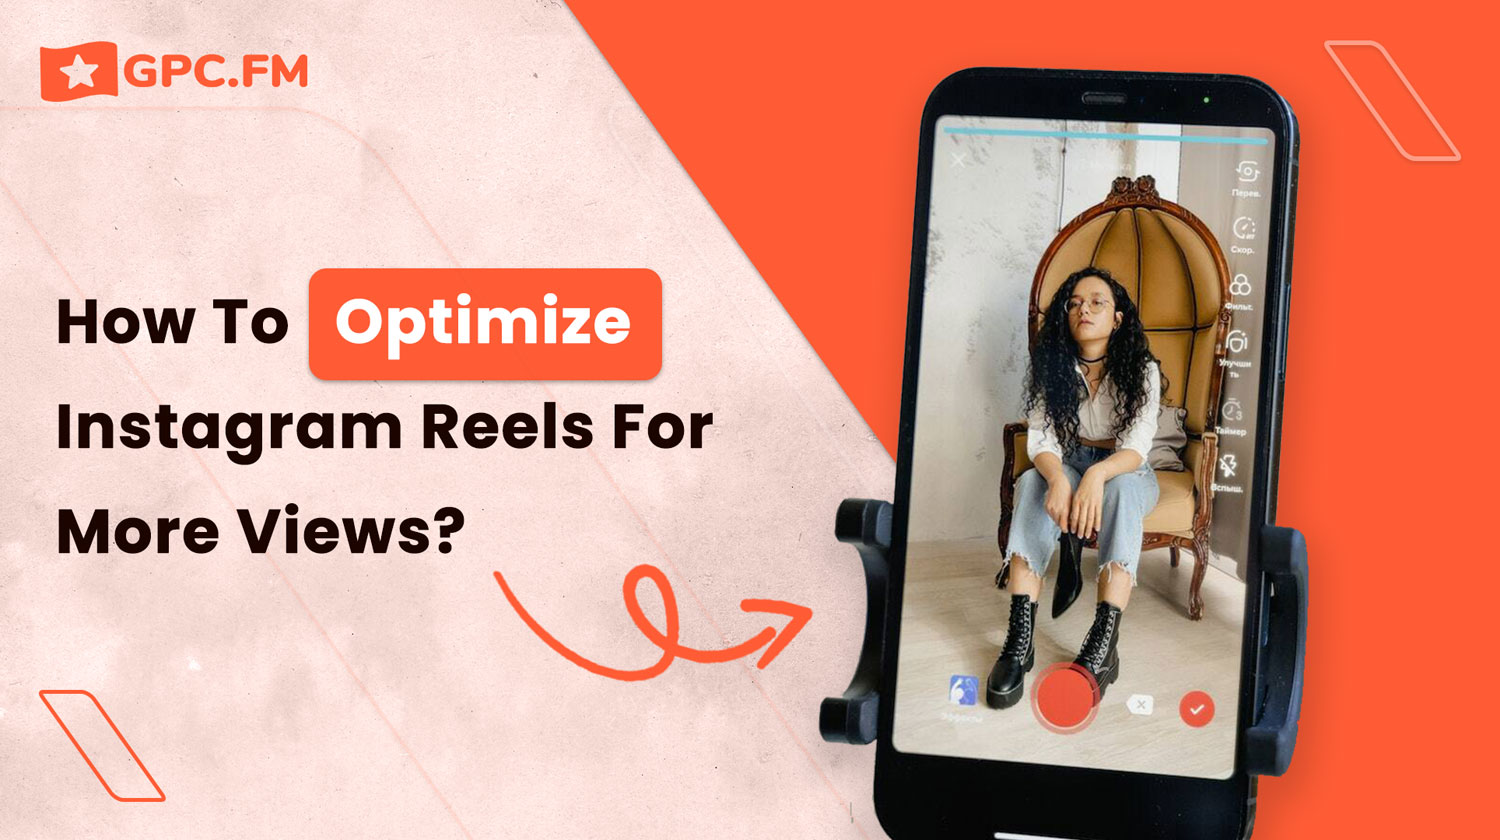 How To Optimize Instagram Reels for more views